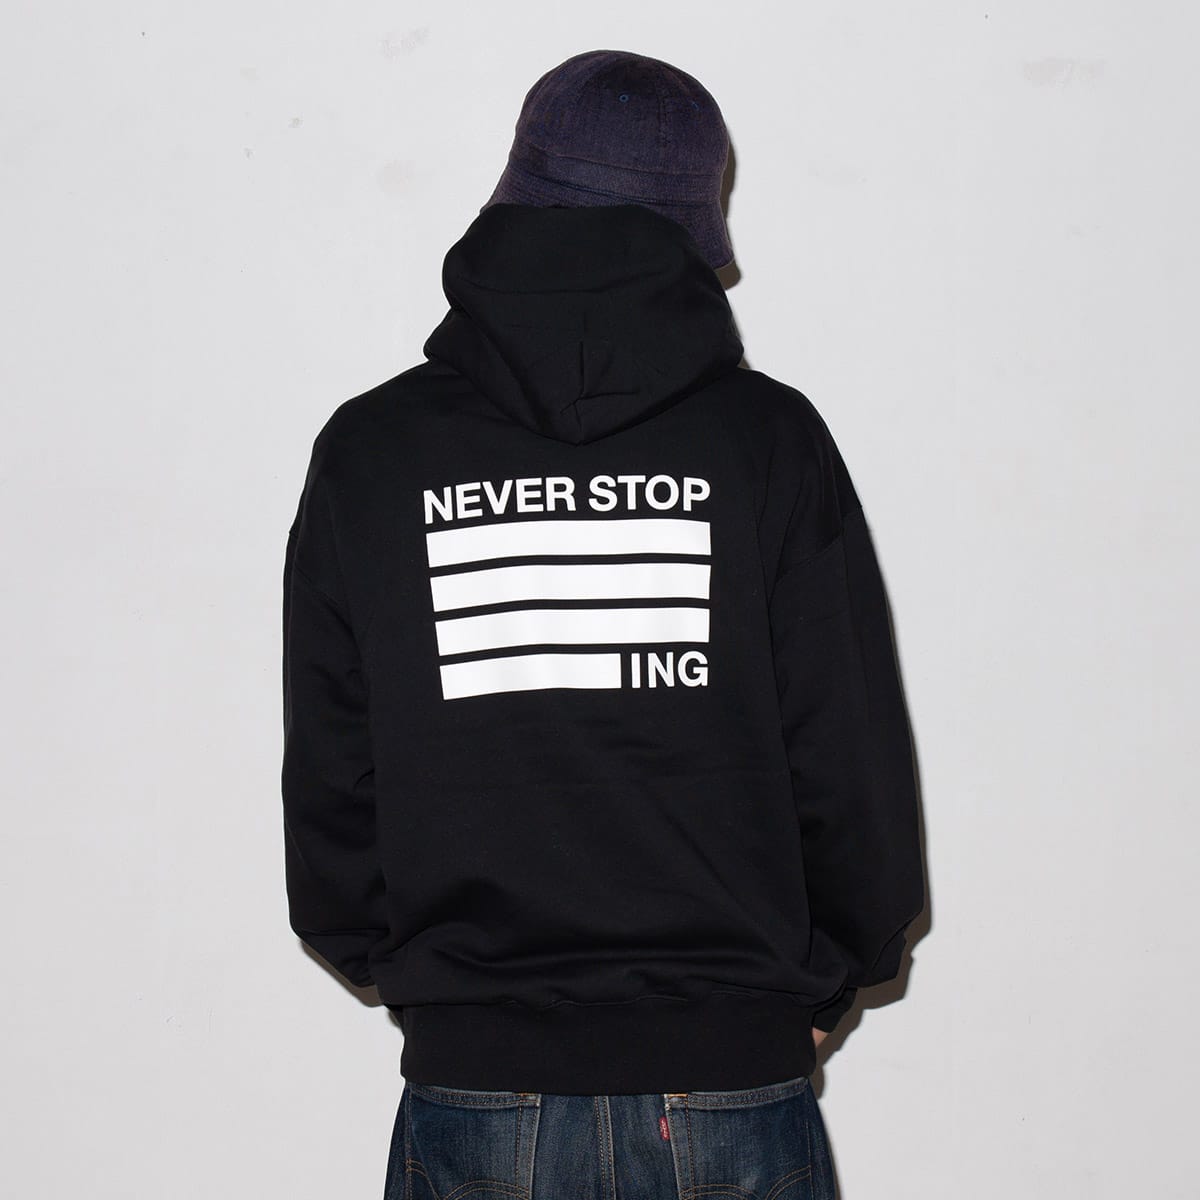 THE NORTH FACE NEVER STOP ING HOODIE BLACK